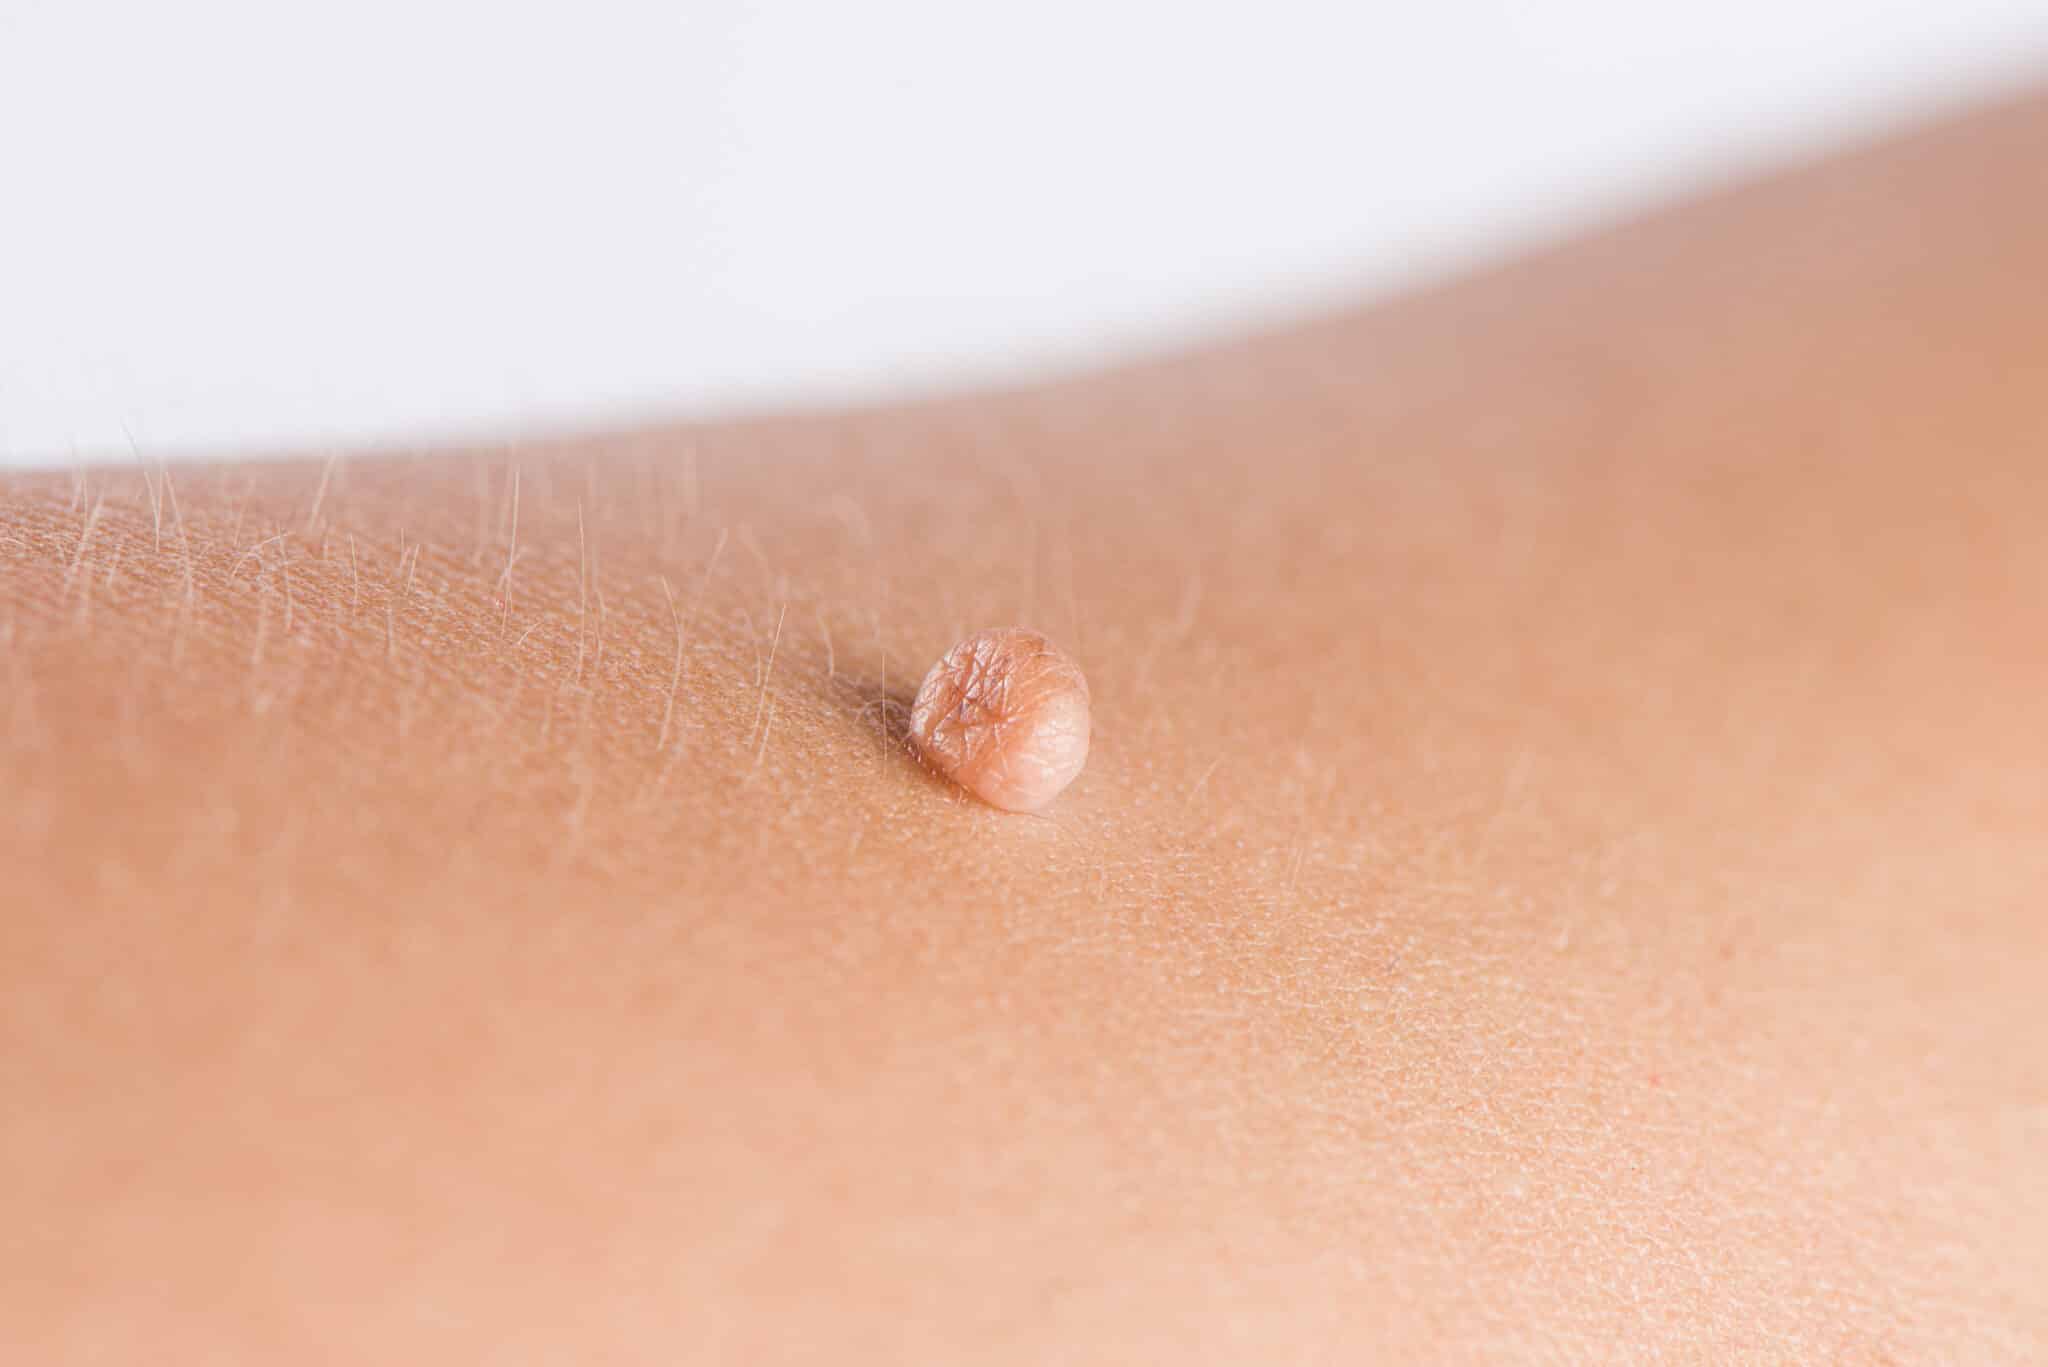 Can hormonal changes cause skin tags to develop?